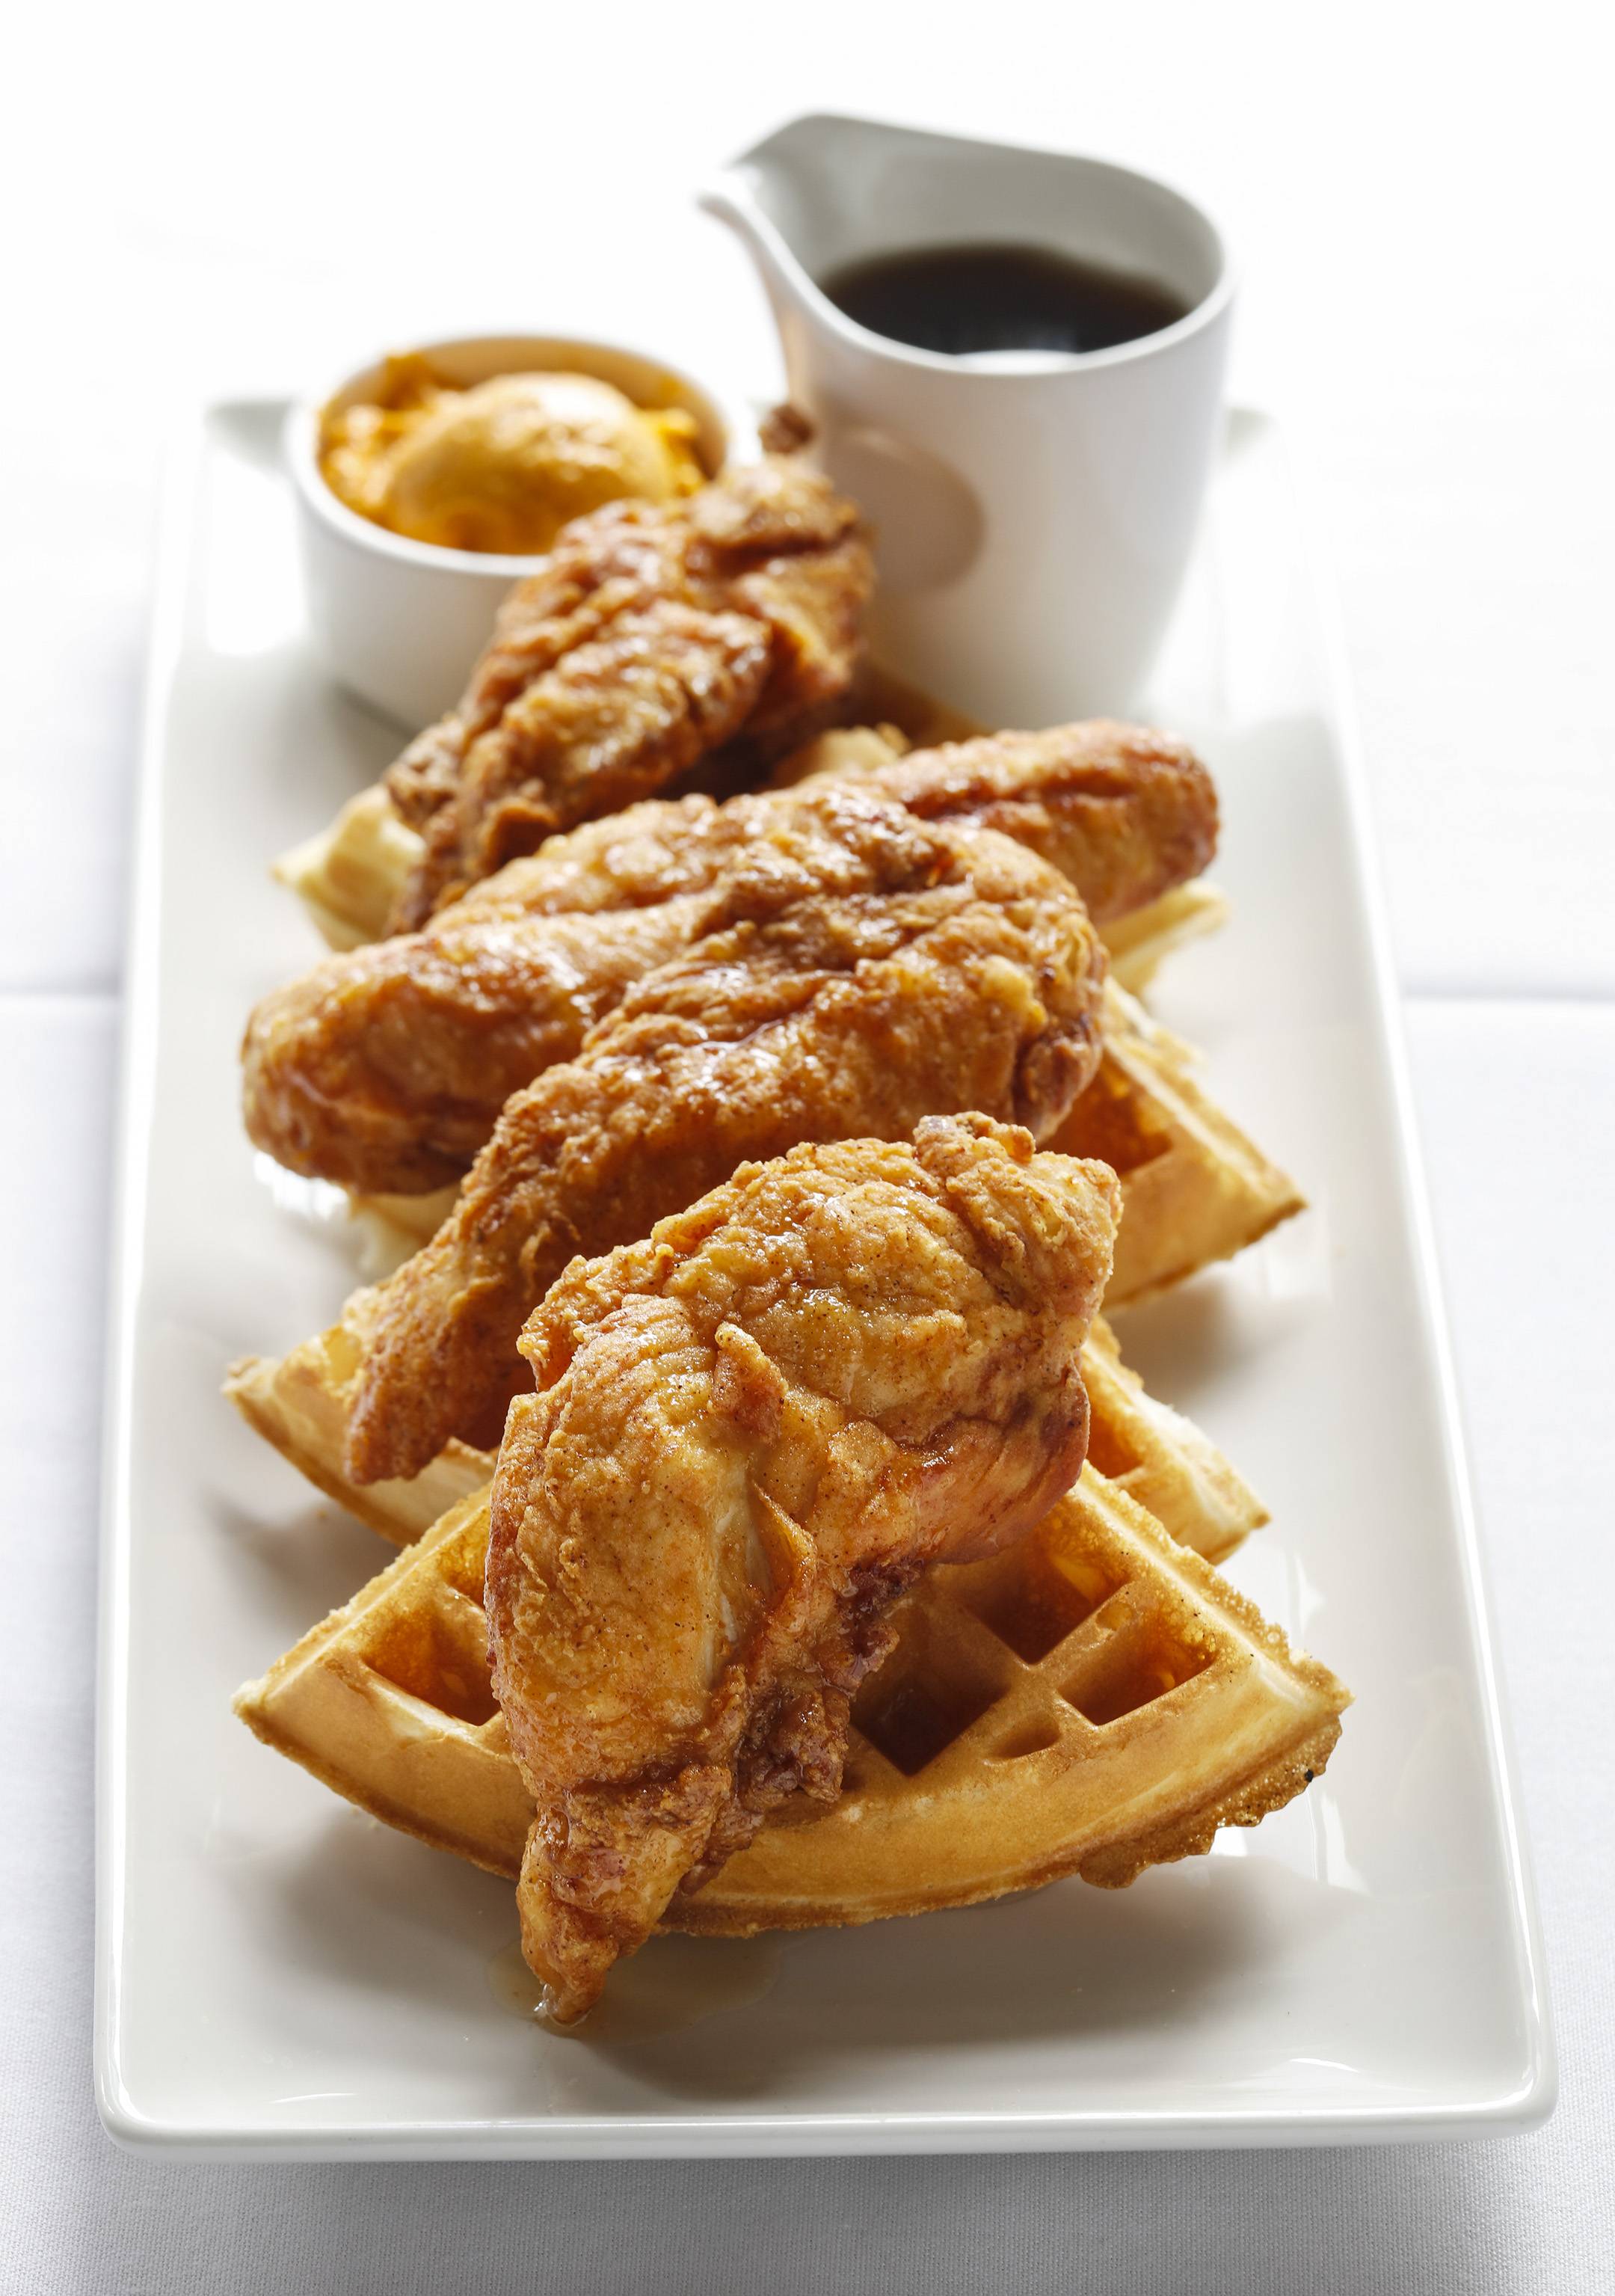 Best Rochester dishes: chicken and waffles